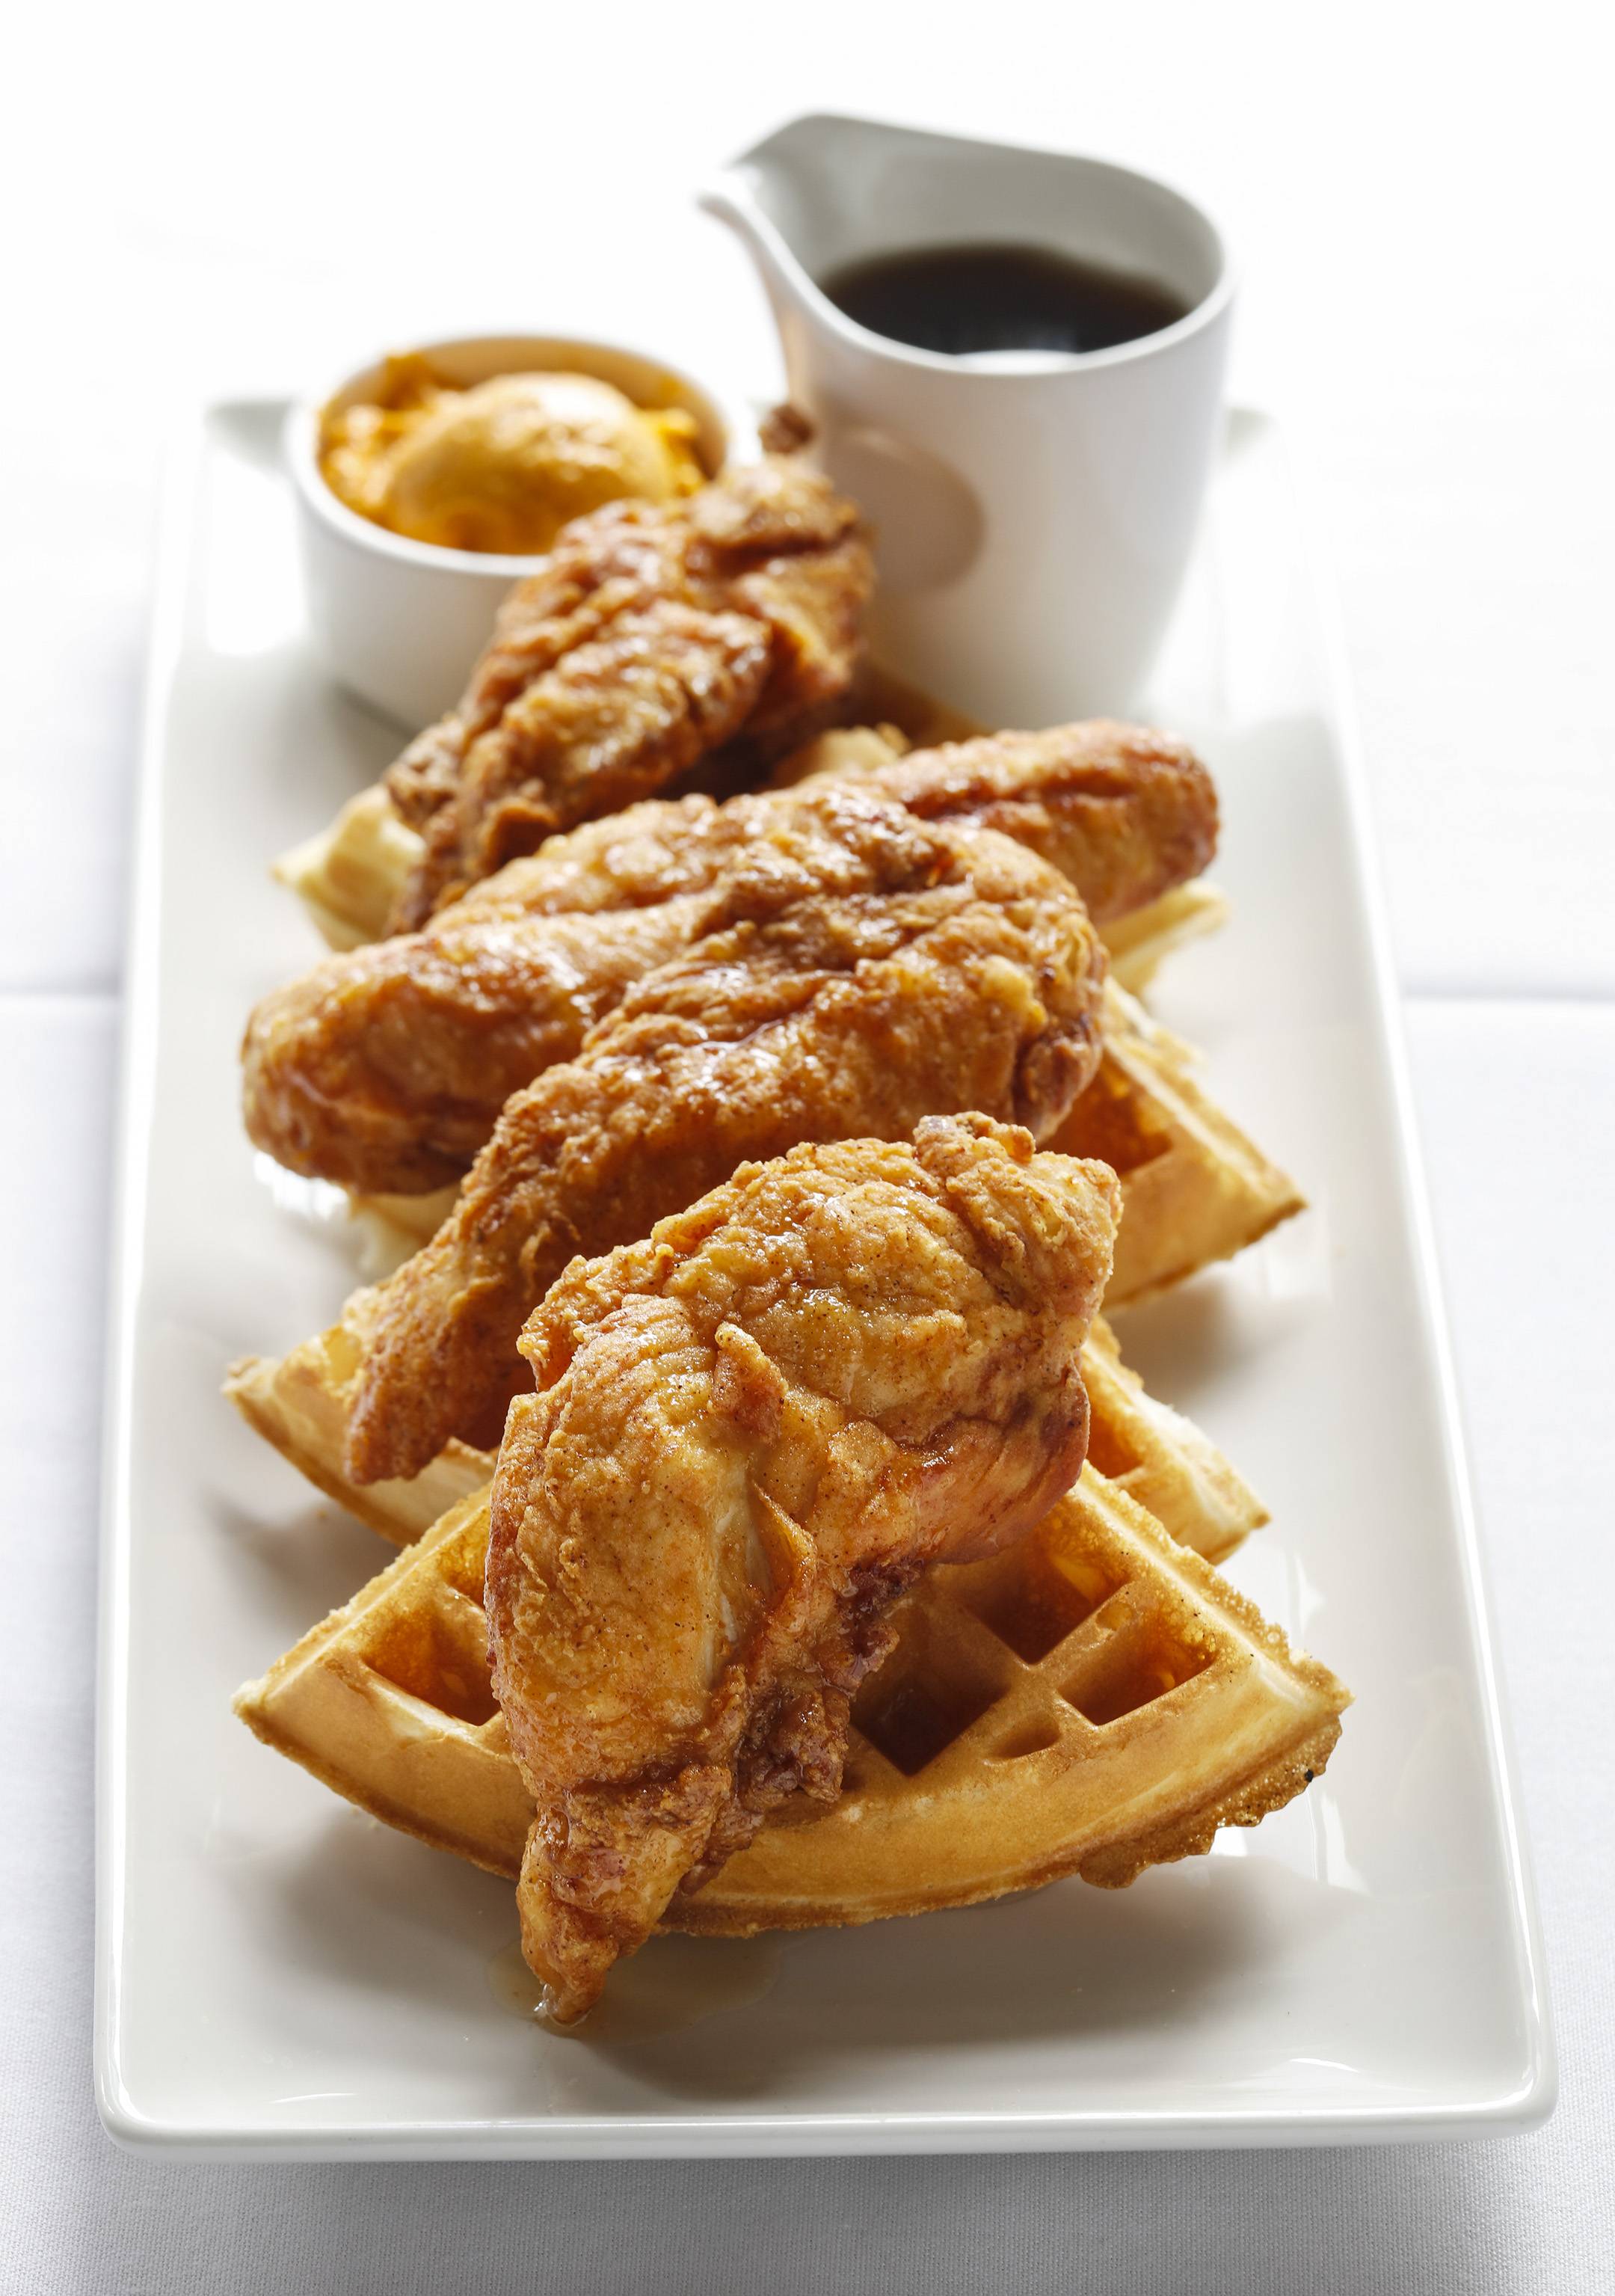 Best Rochester dishes: chicken and waffles